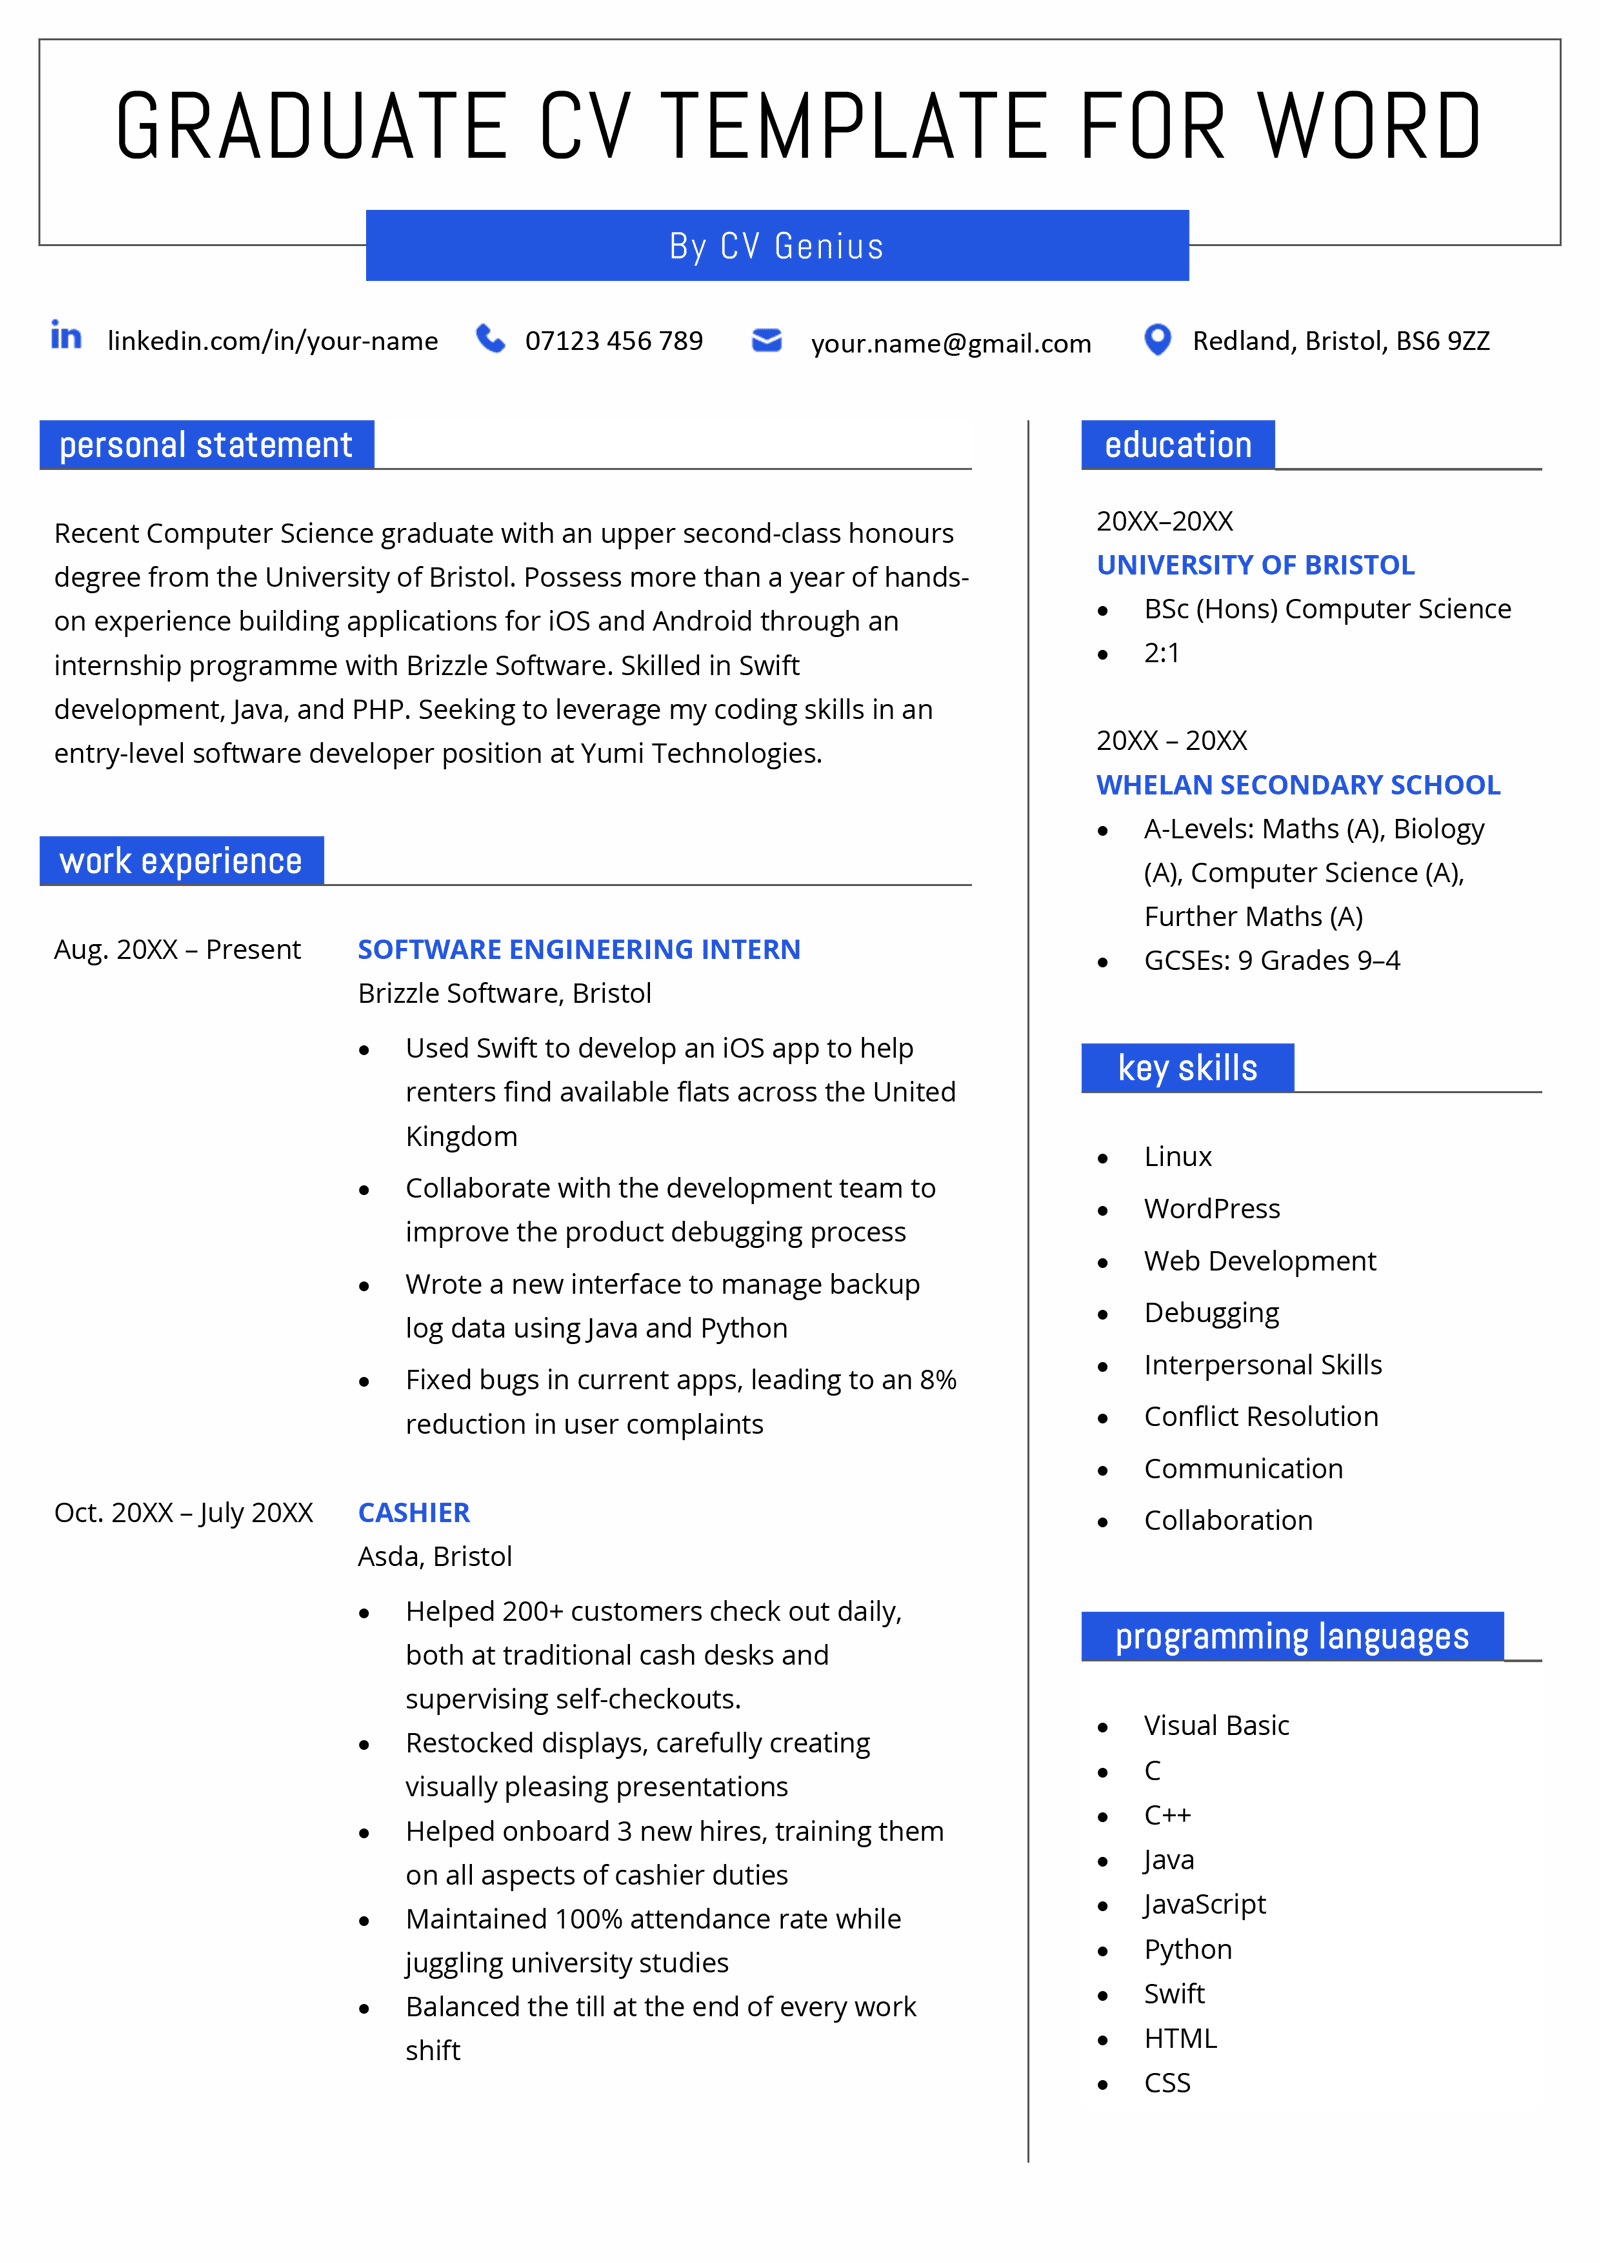 A graduate CV for Word with a bold header and sections for the applicant's personal statement, contact information, key skills, education, and work experience.